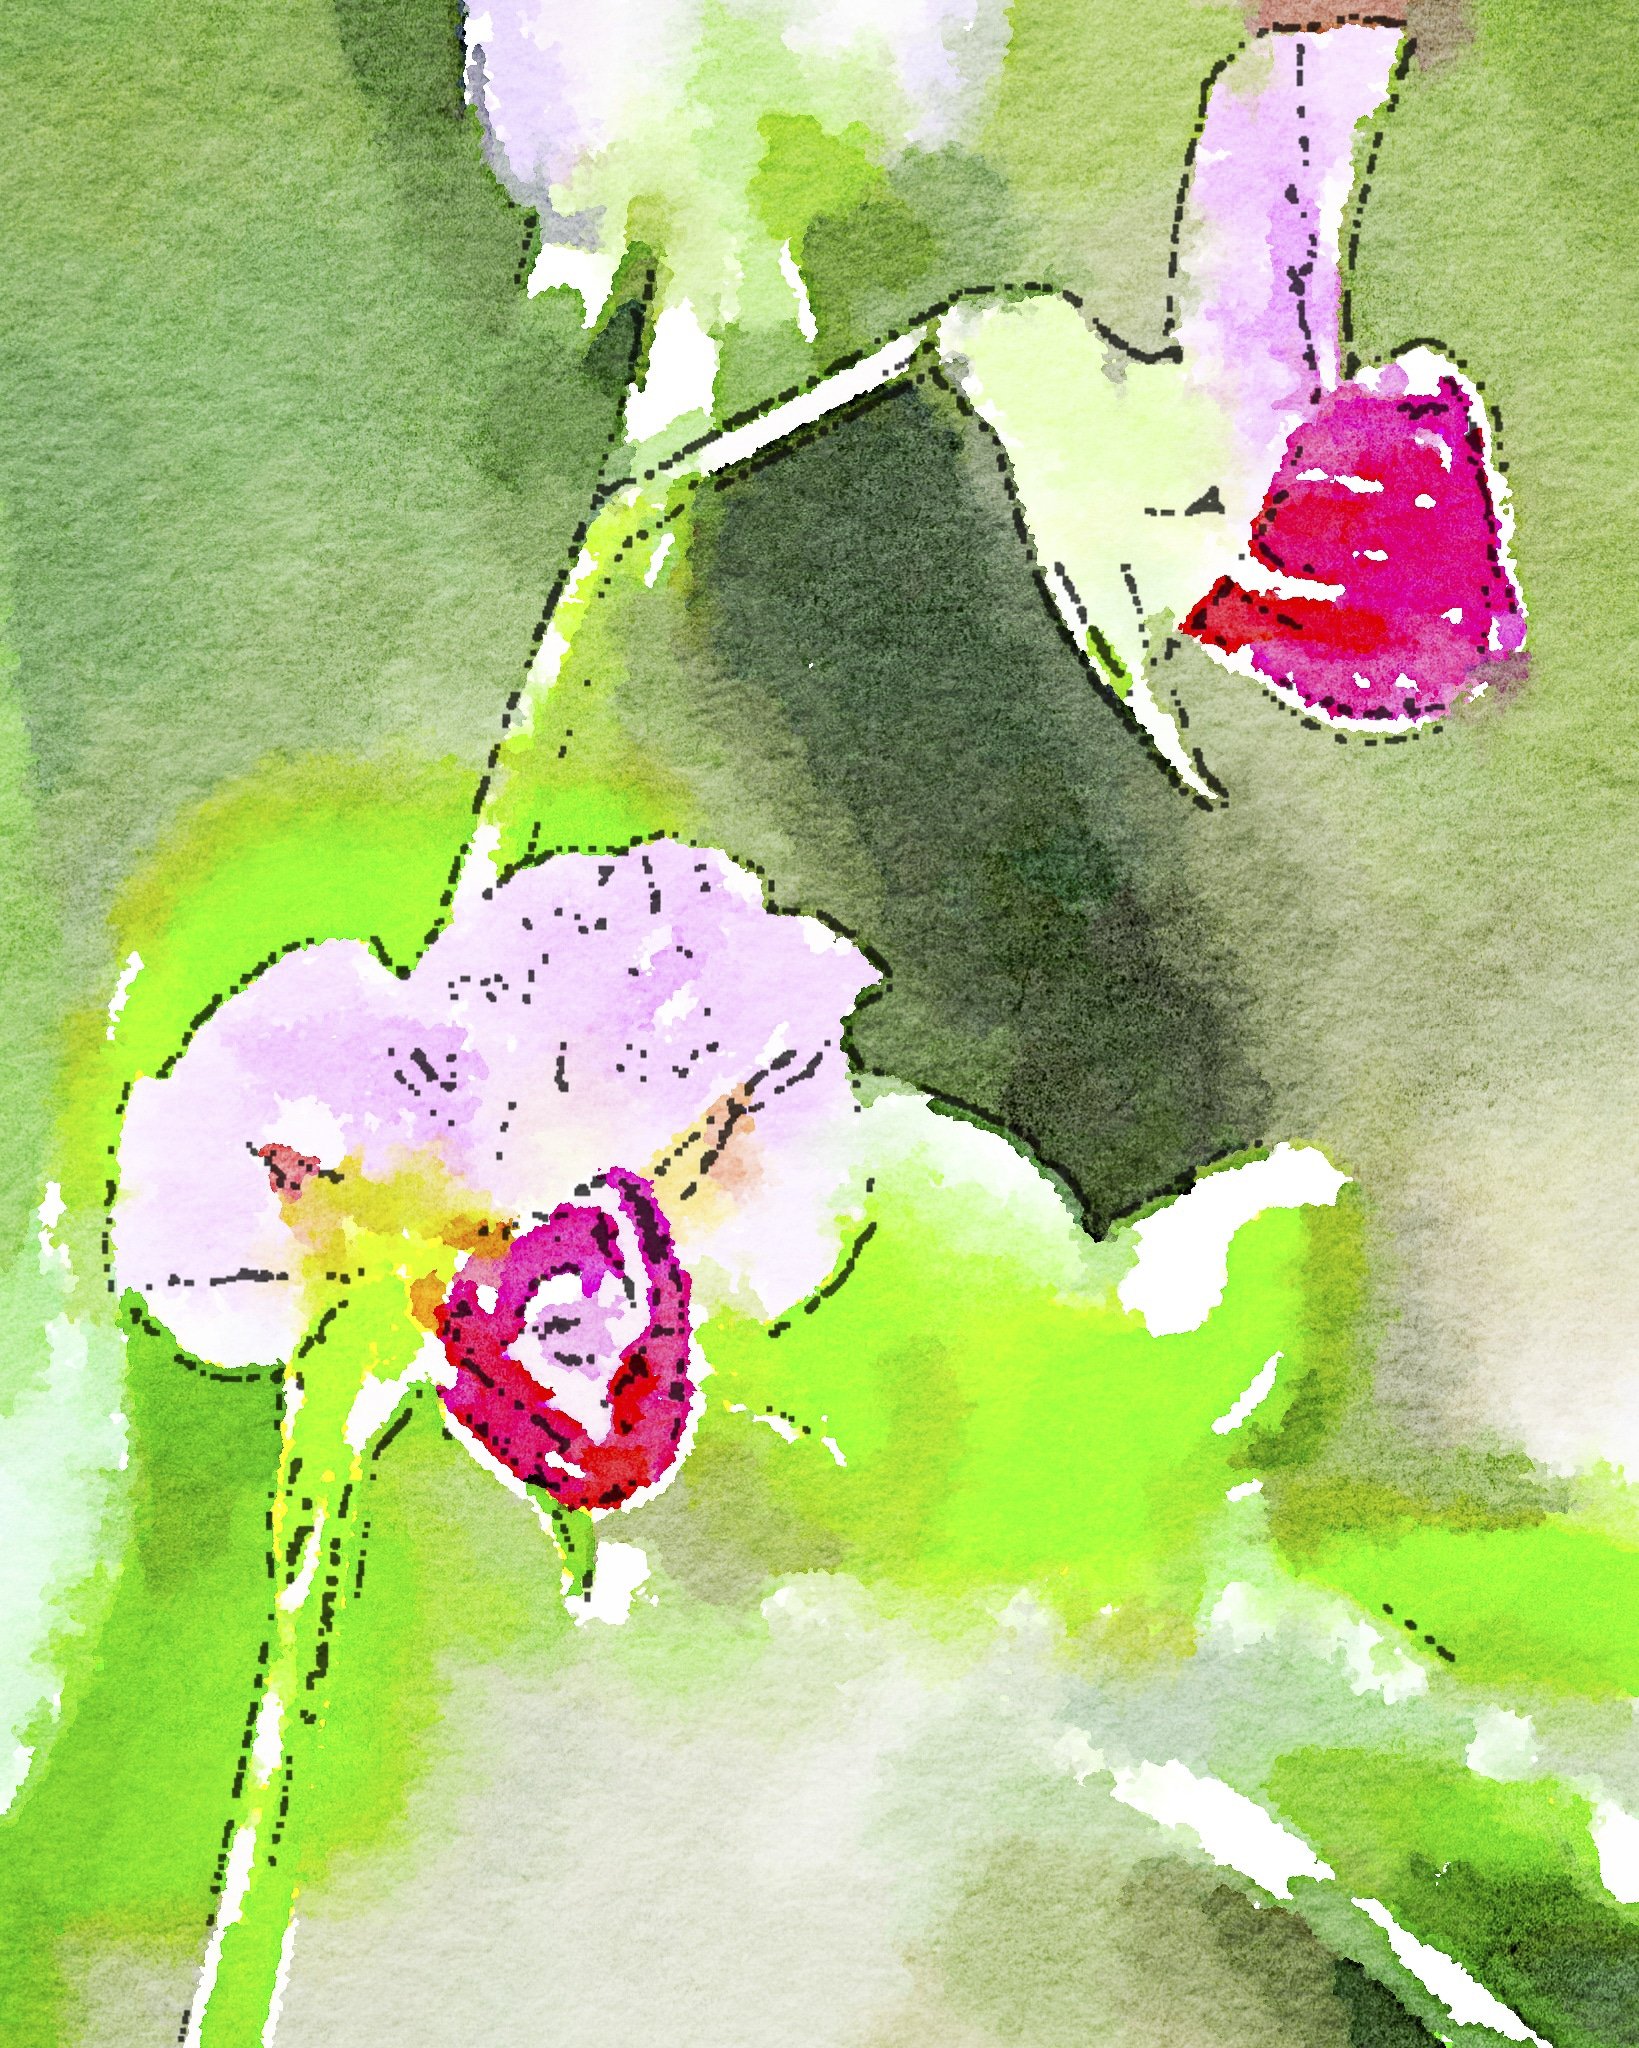 Flowers painted in the Waterlogue cell phone app.